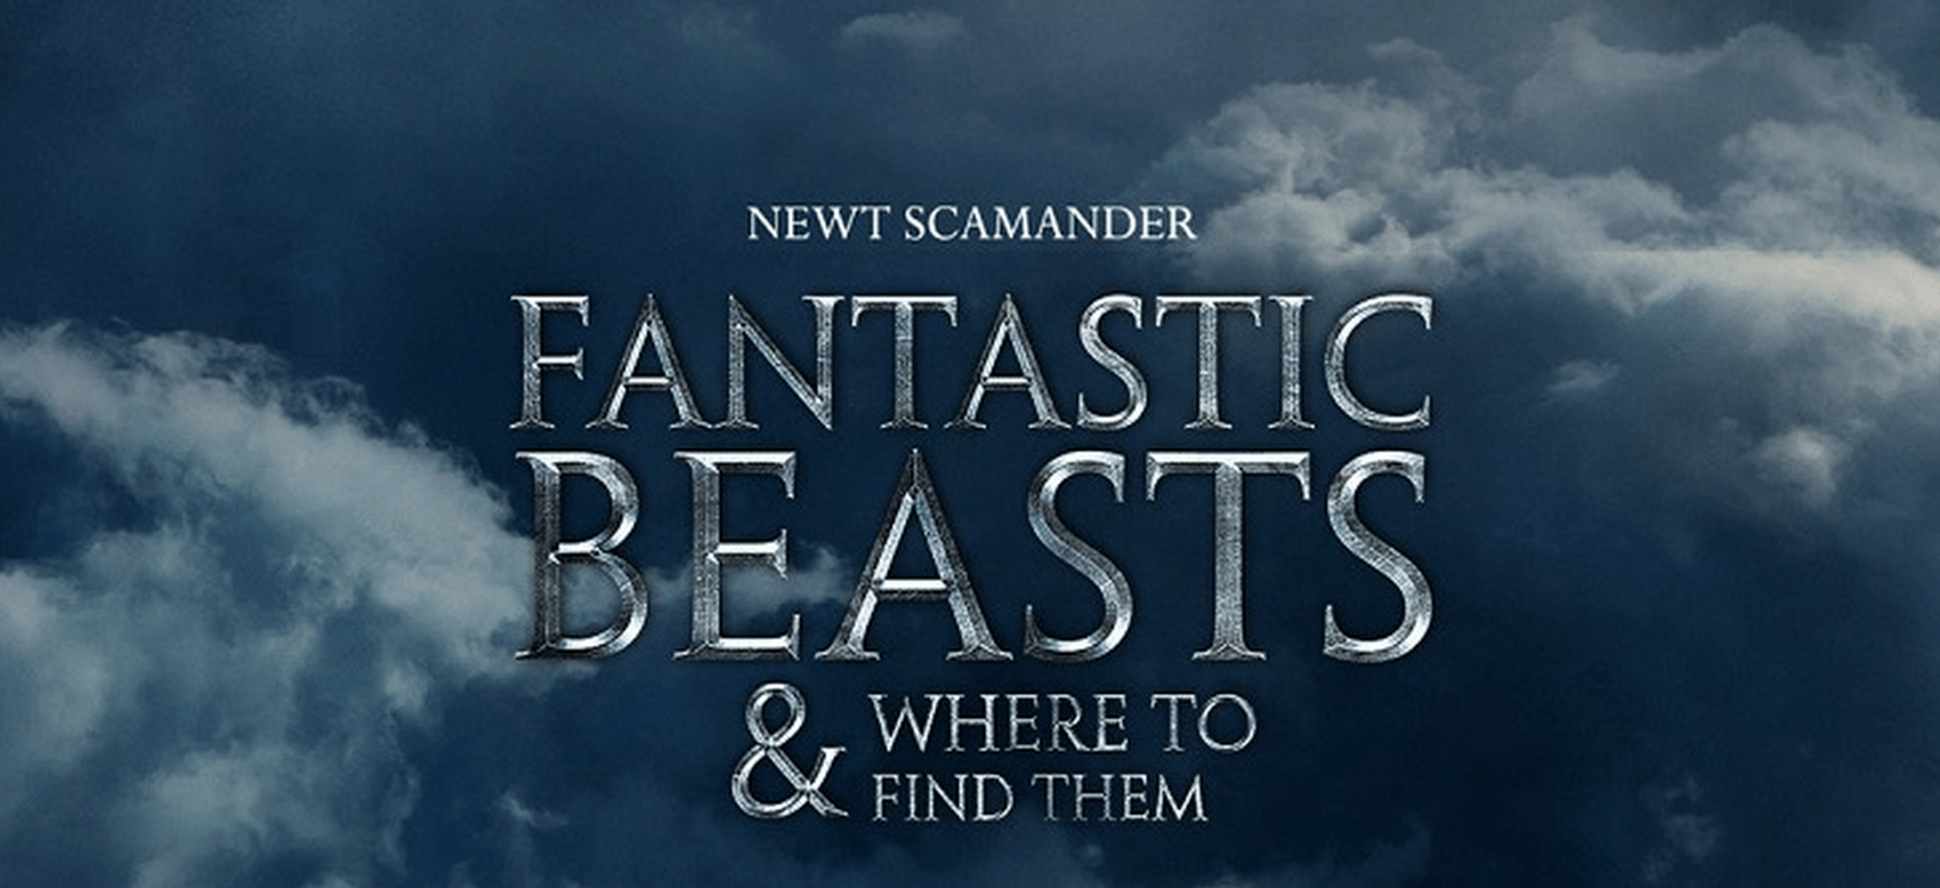 Fantastic Beasts and Where to Find Them Wallpaper Image Photo